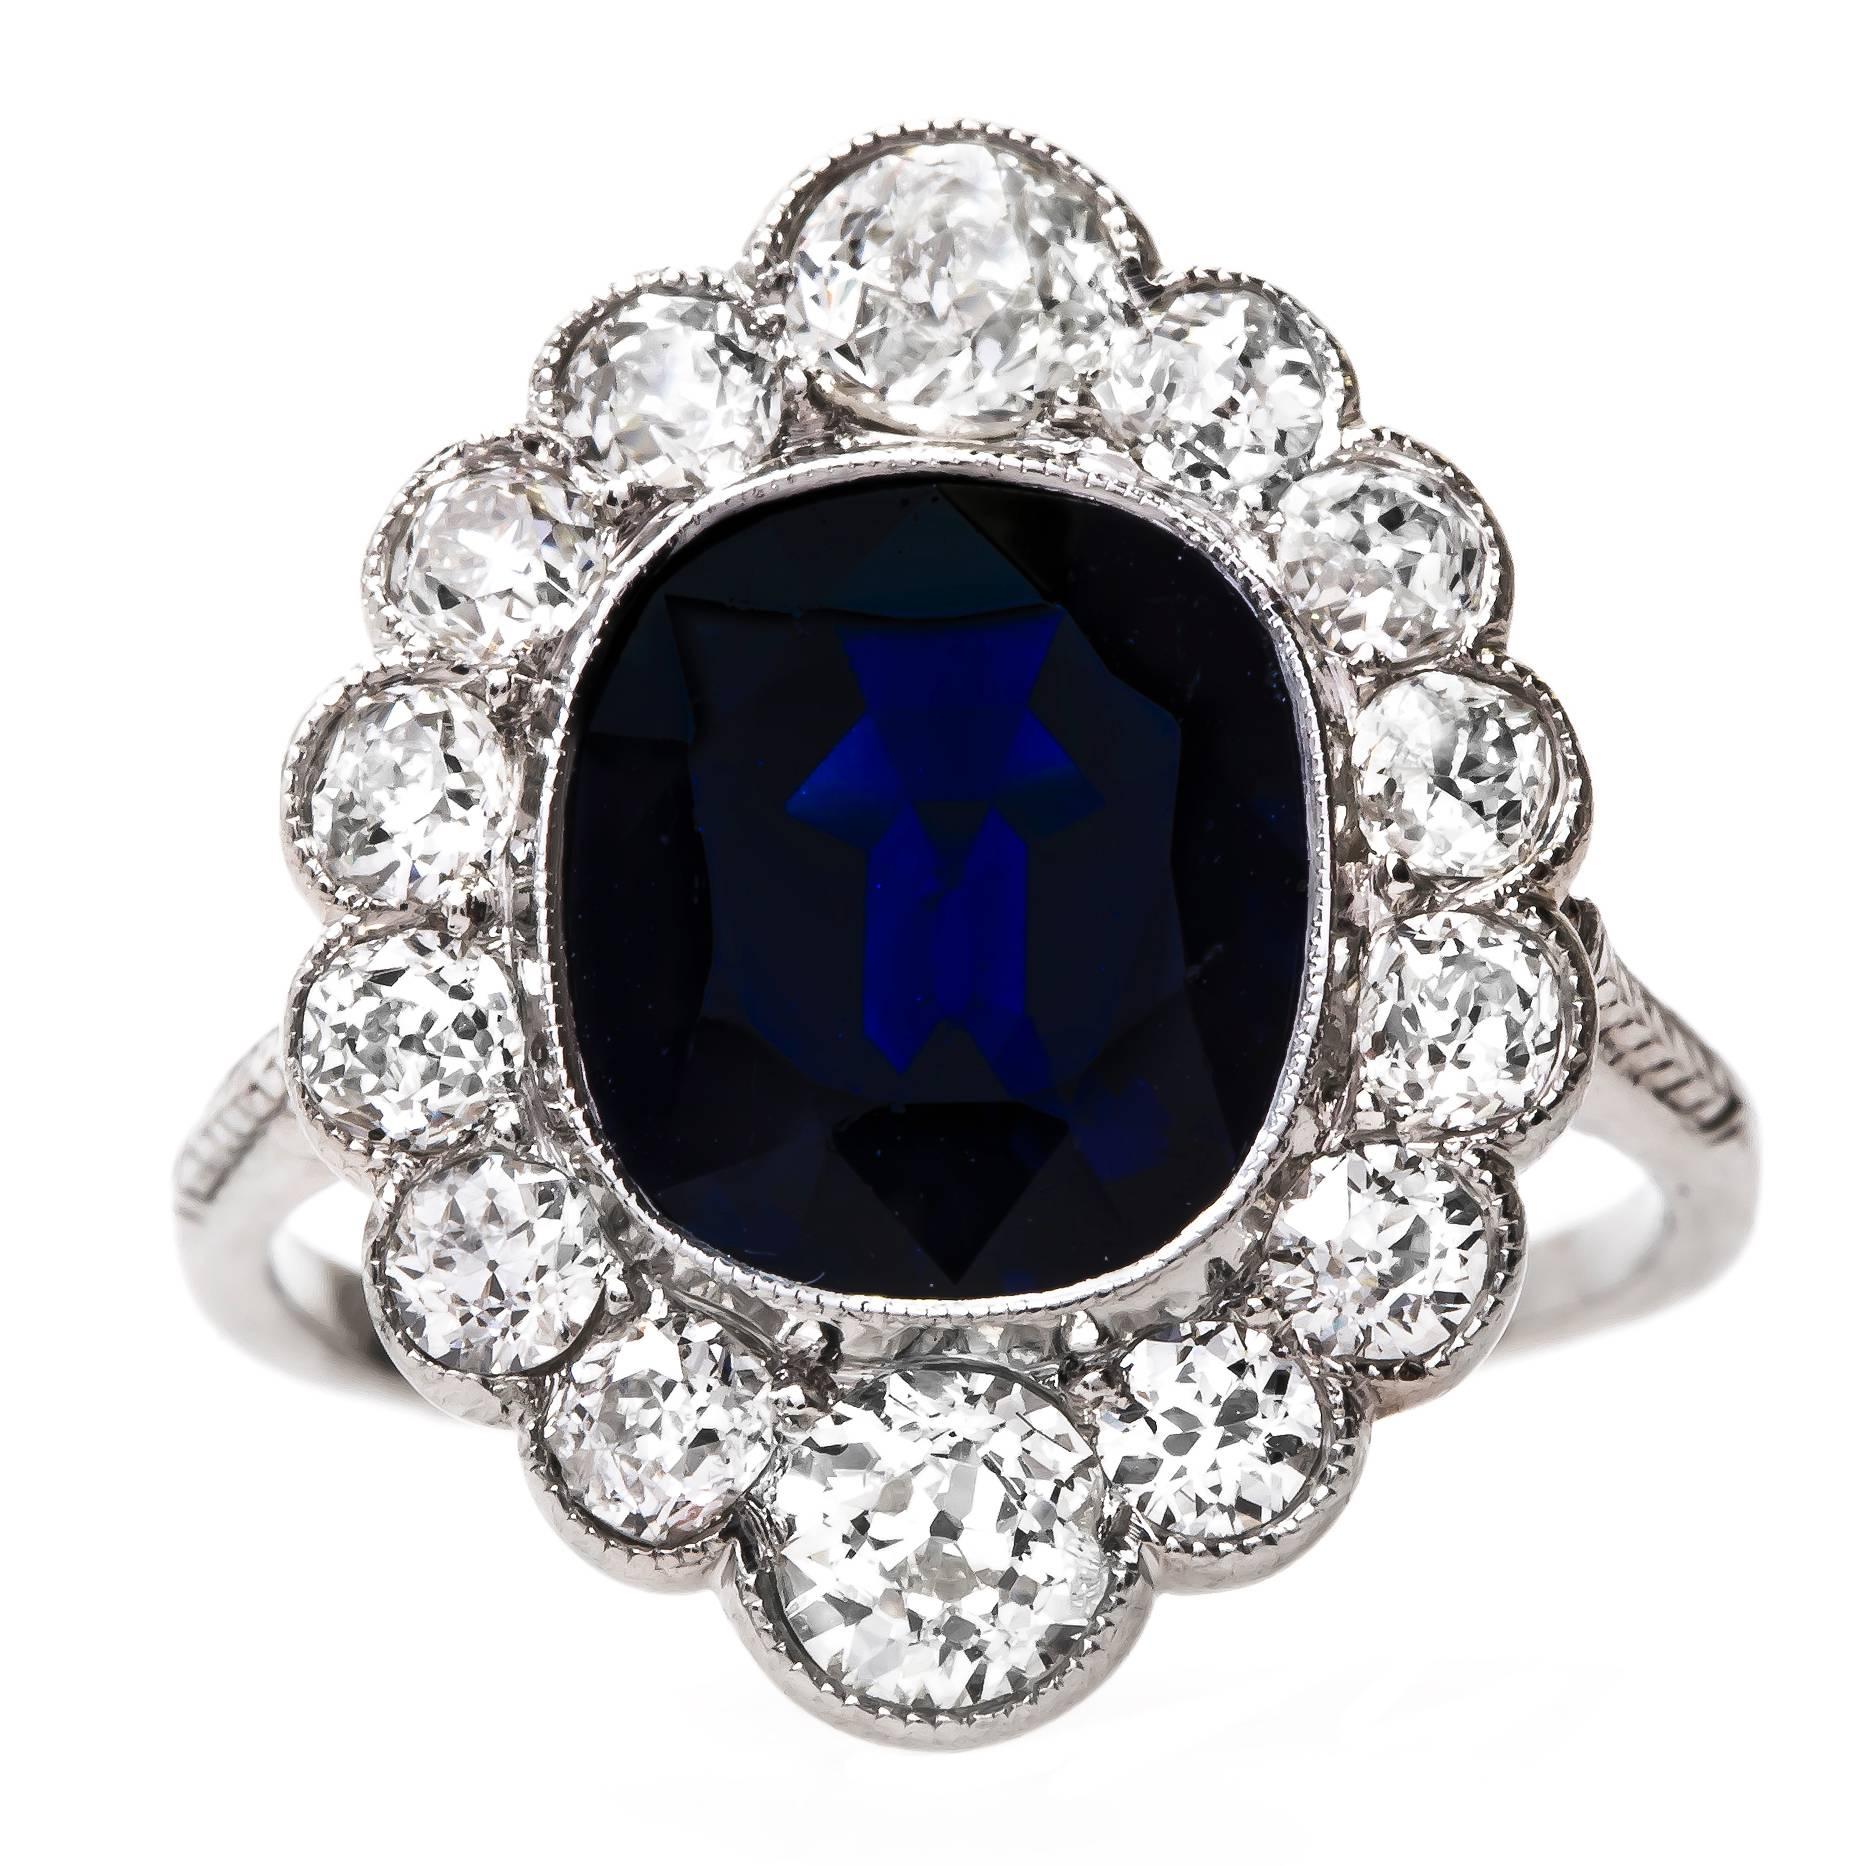 Regal Edwardian Era Engagement Ring with Deep Blue Sapphire Center For Sale